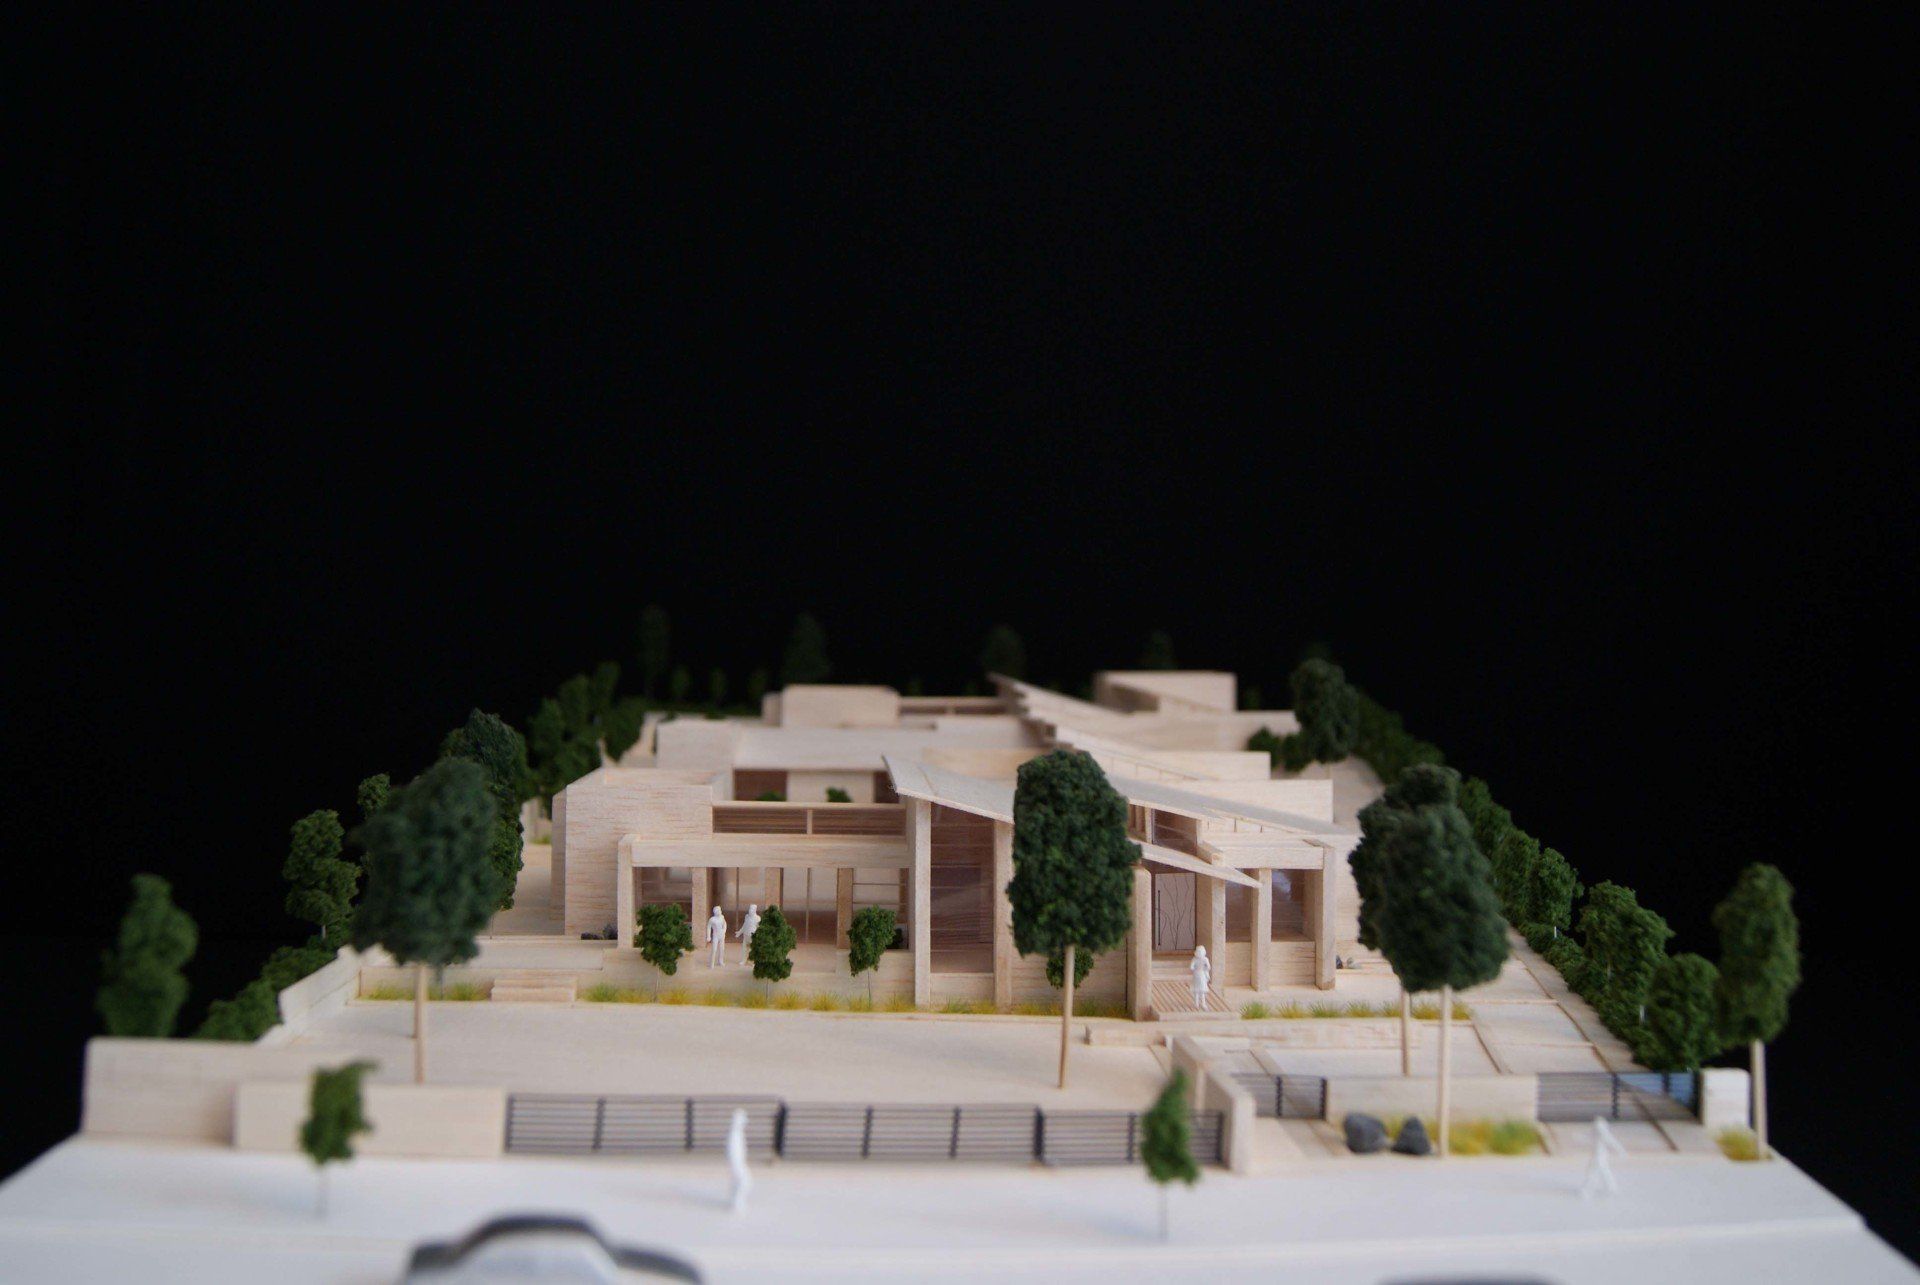 Model of a new residential  home